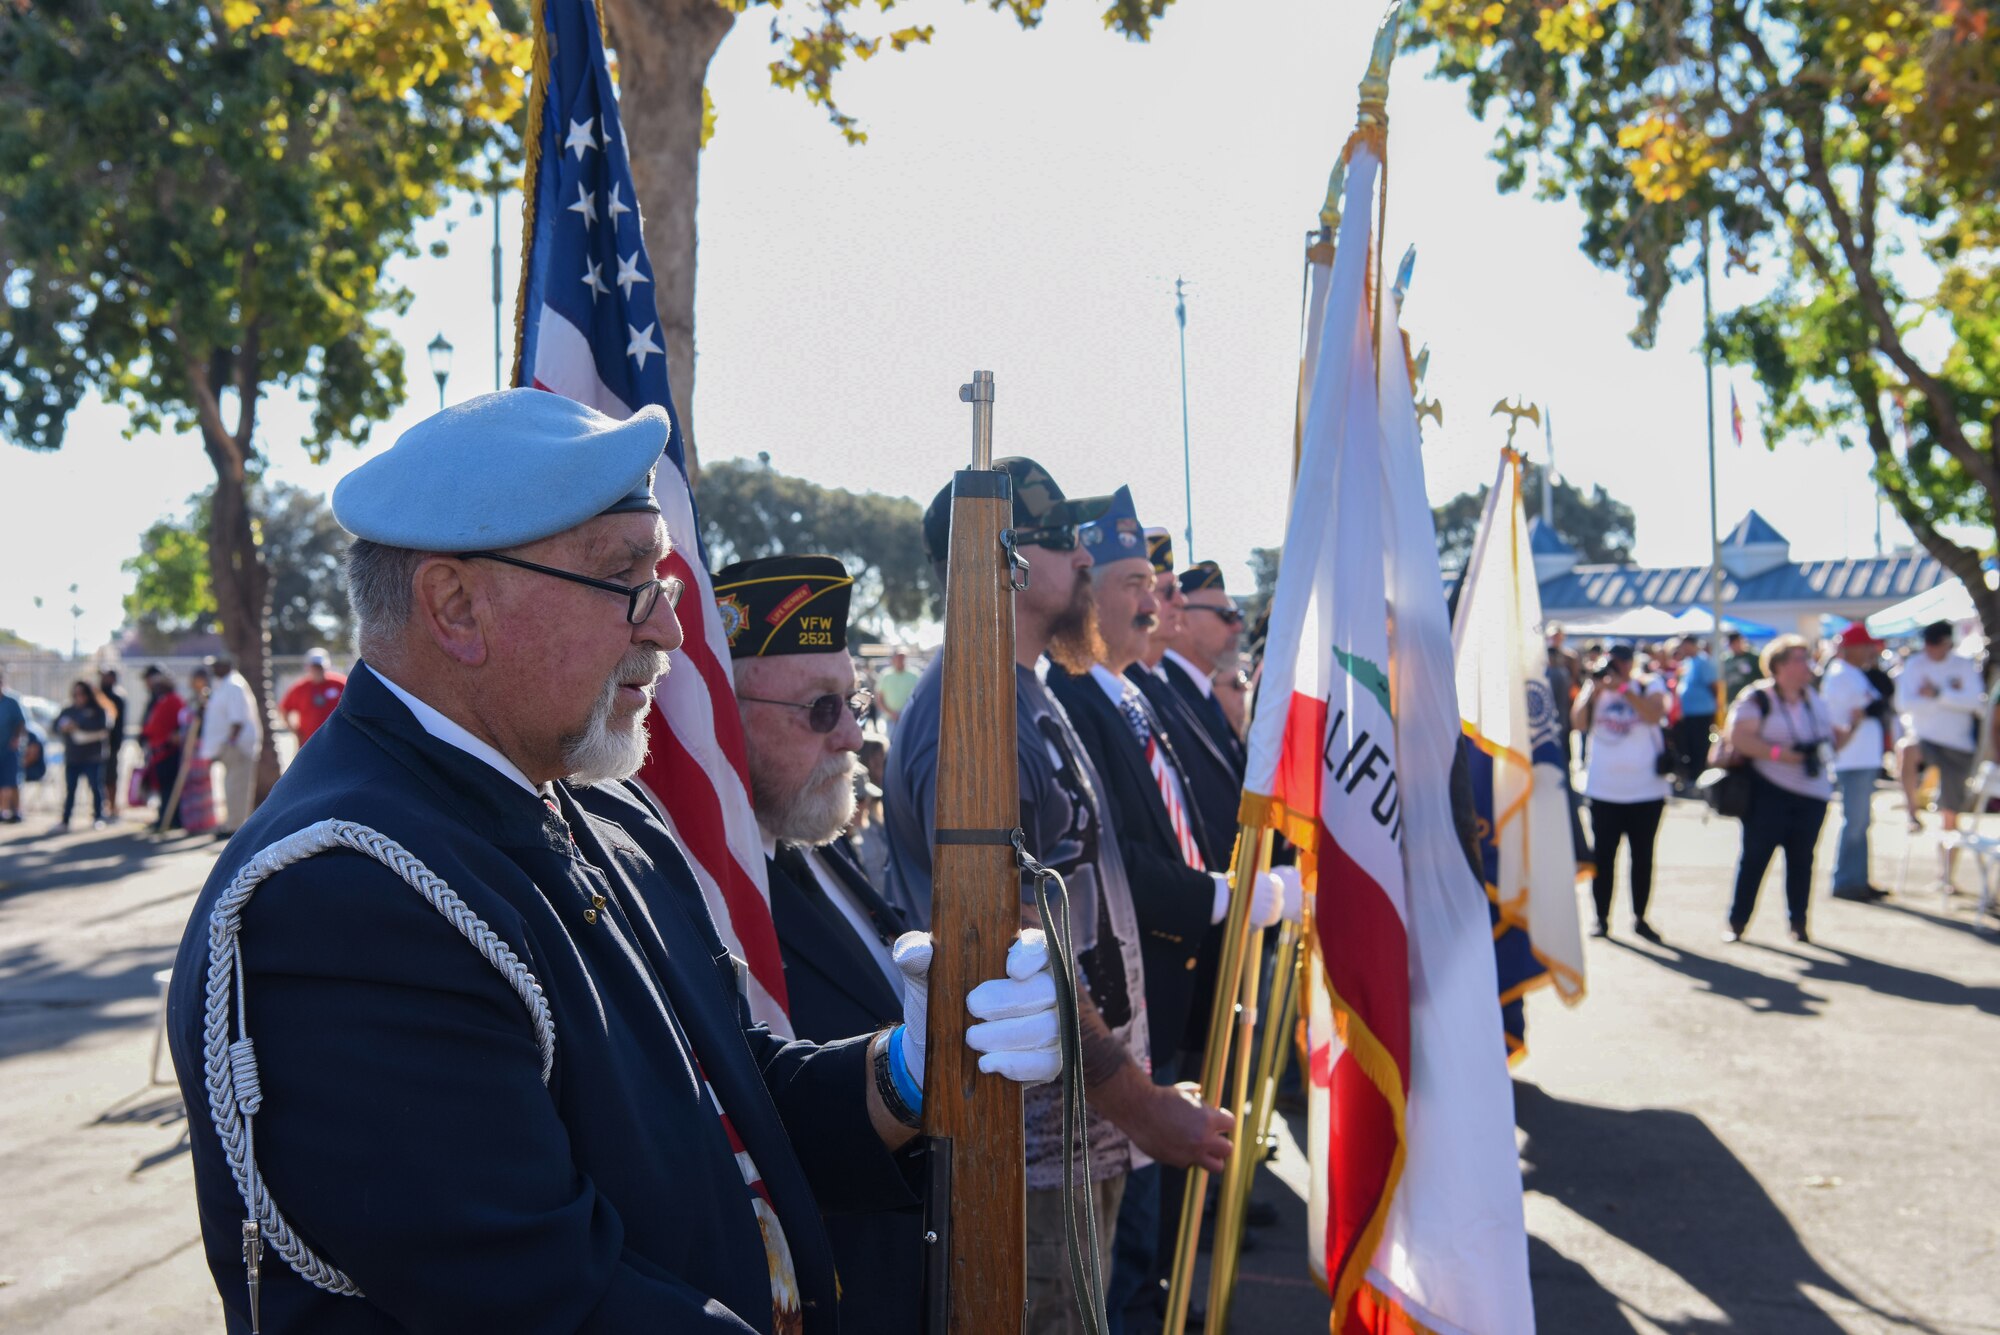 Local veterans post the colors at the Veteran Stand Down event Oct. 20, 2018 at the Santa Maria Fair Grounds, Calif. Posting the colors is a tradition that starts an event, and local veterans had the honor to do it during the Stand Down event.